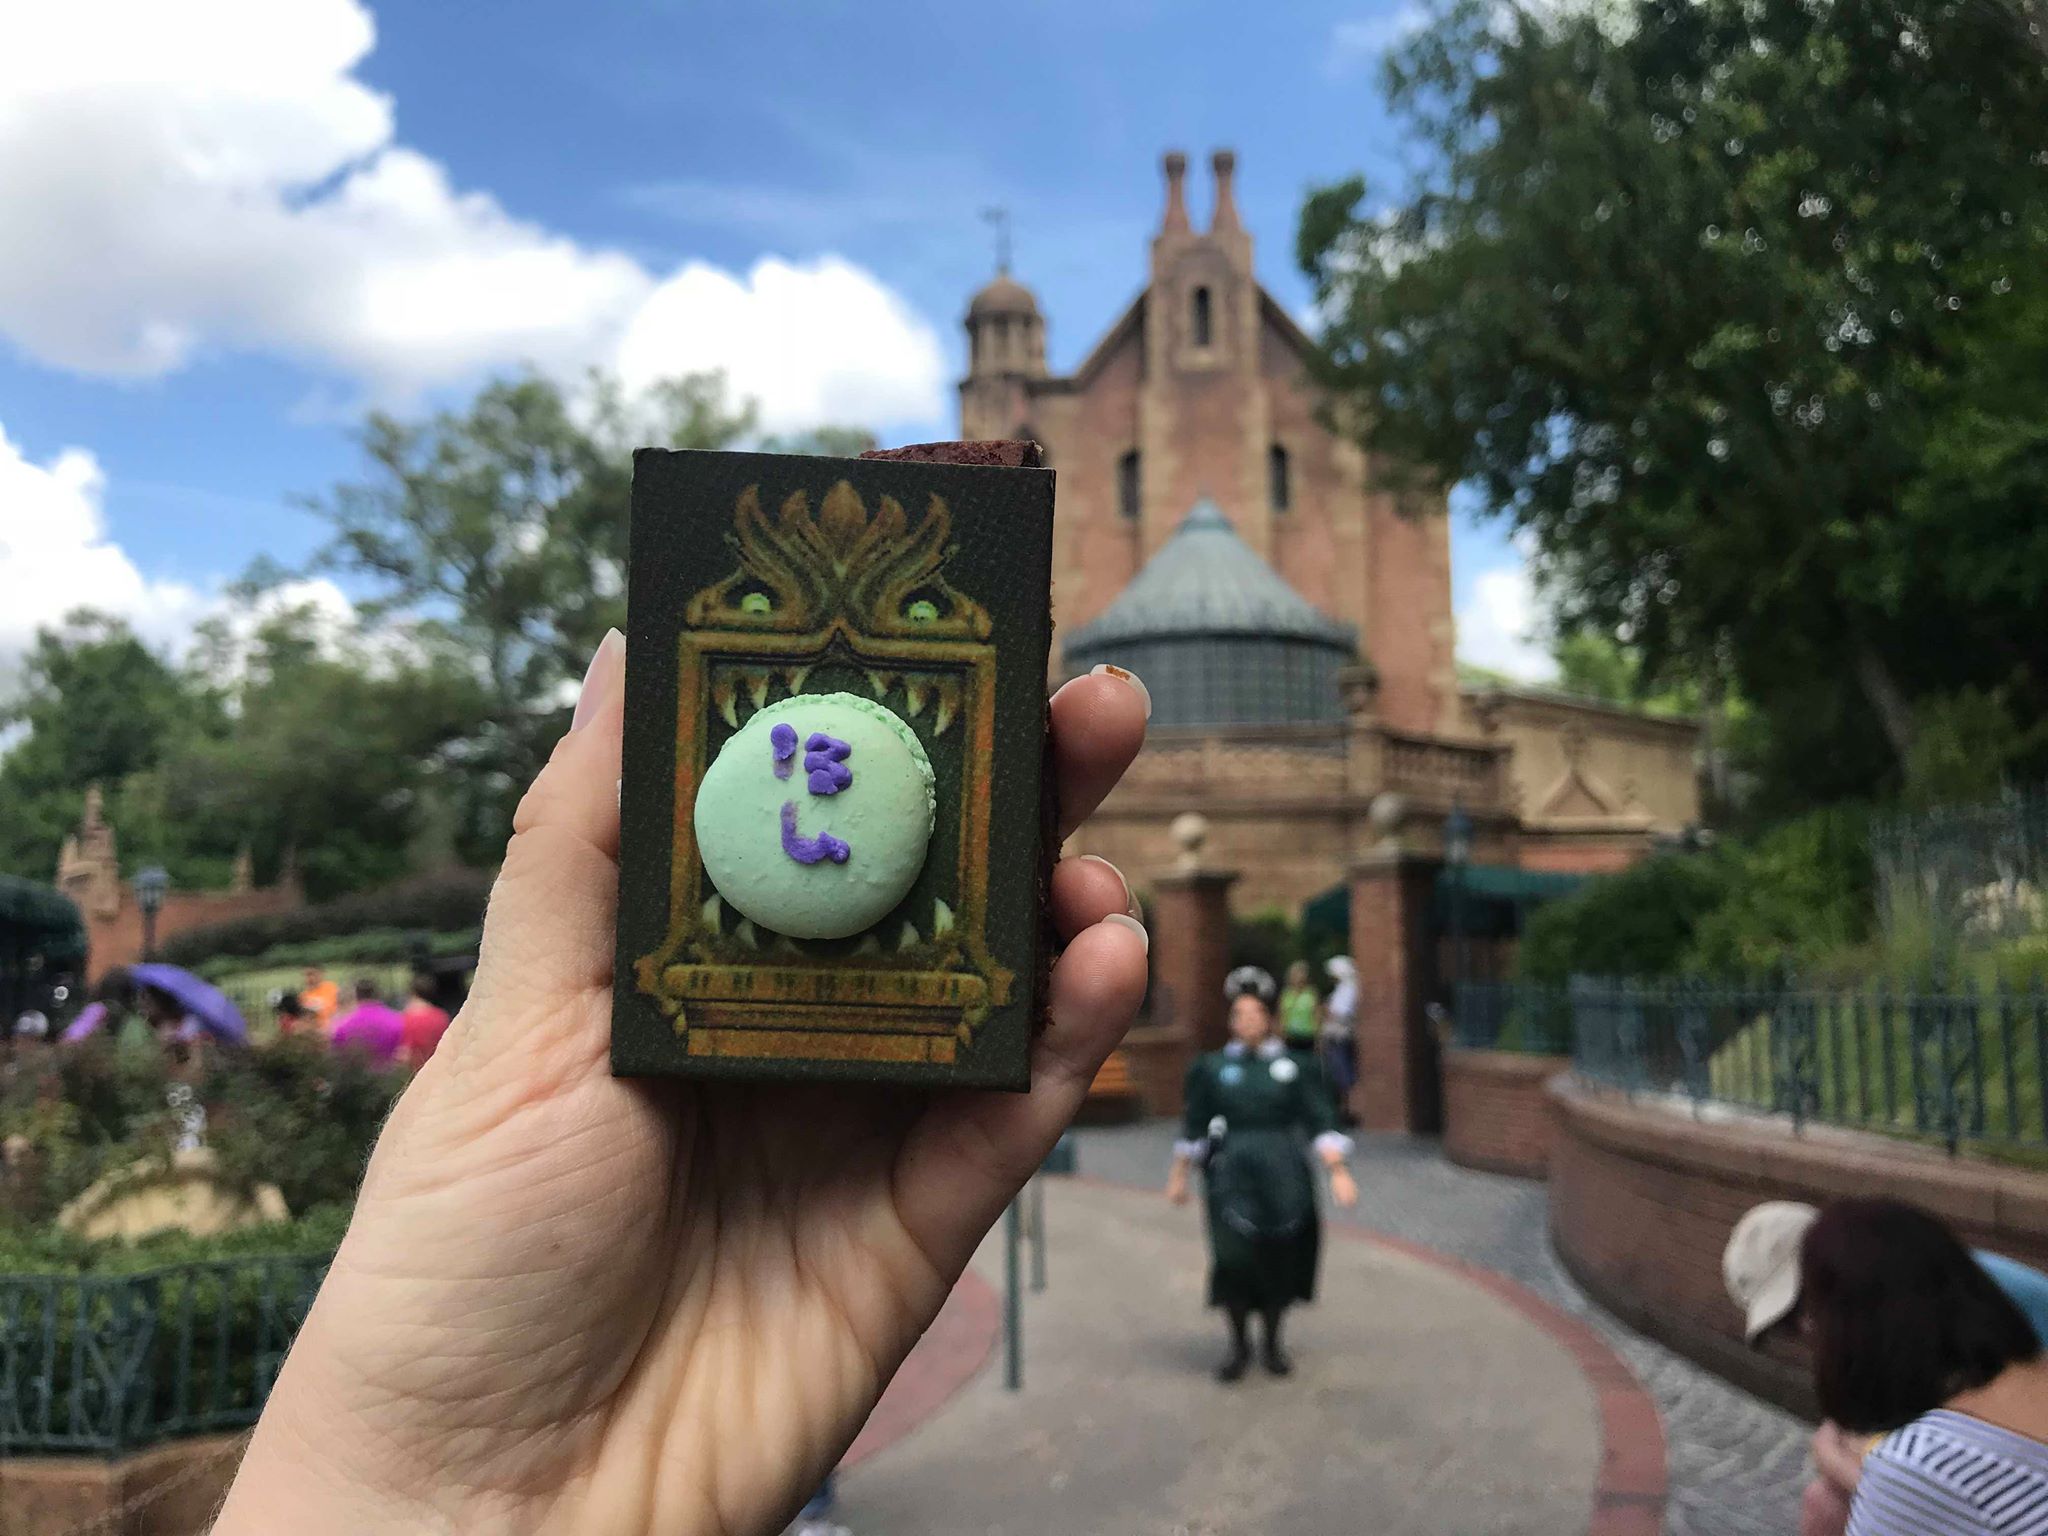 Haunted Mansion Specialty brownie will scare up your appetite